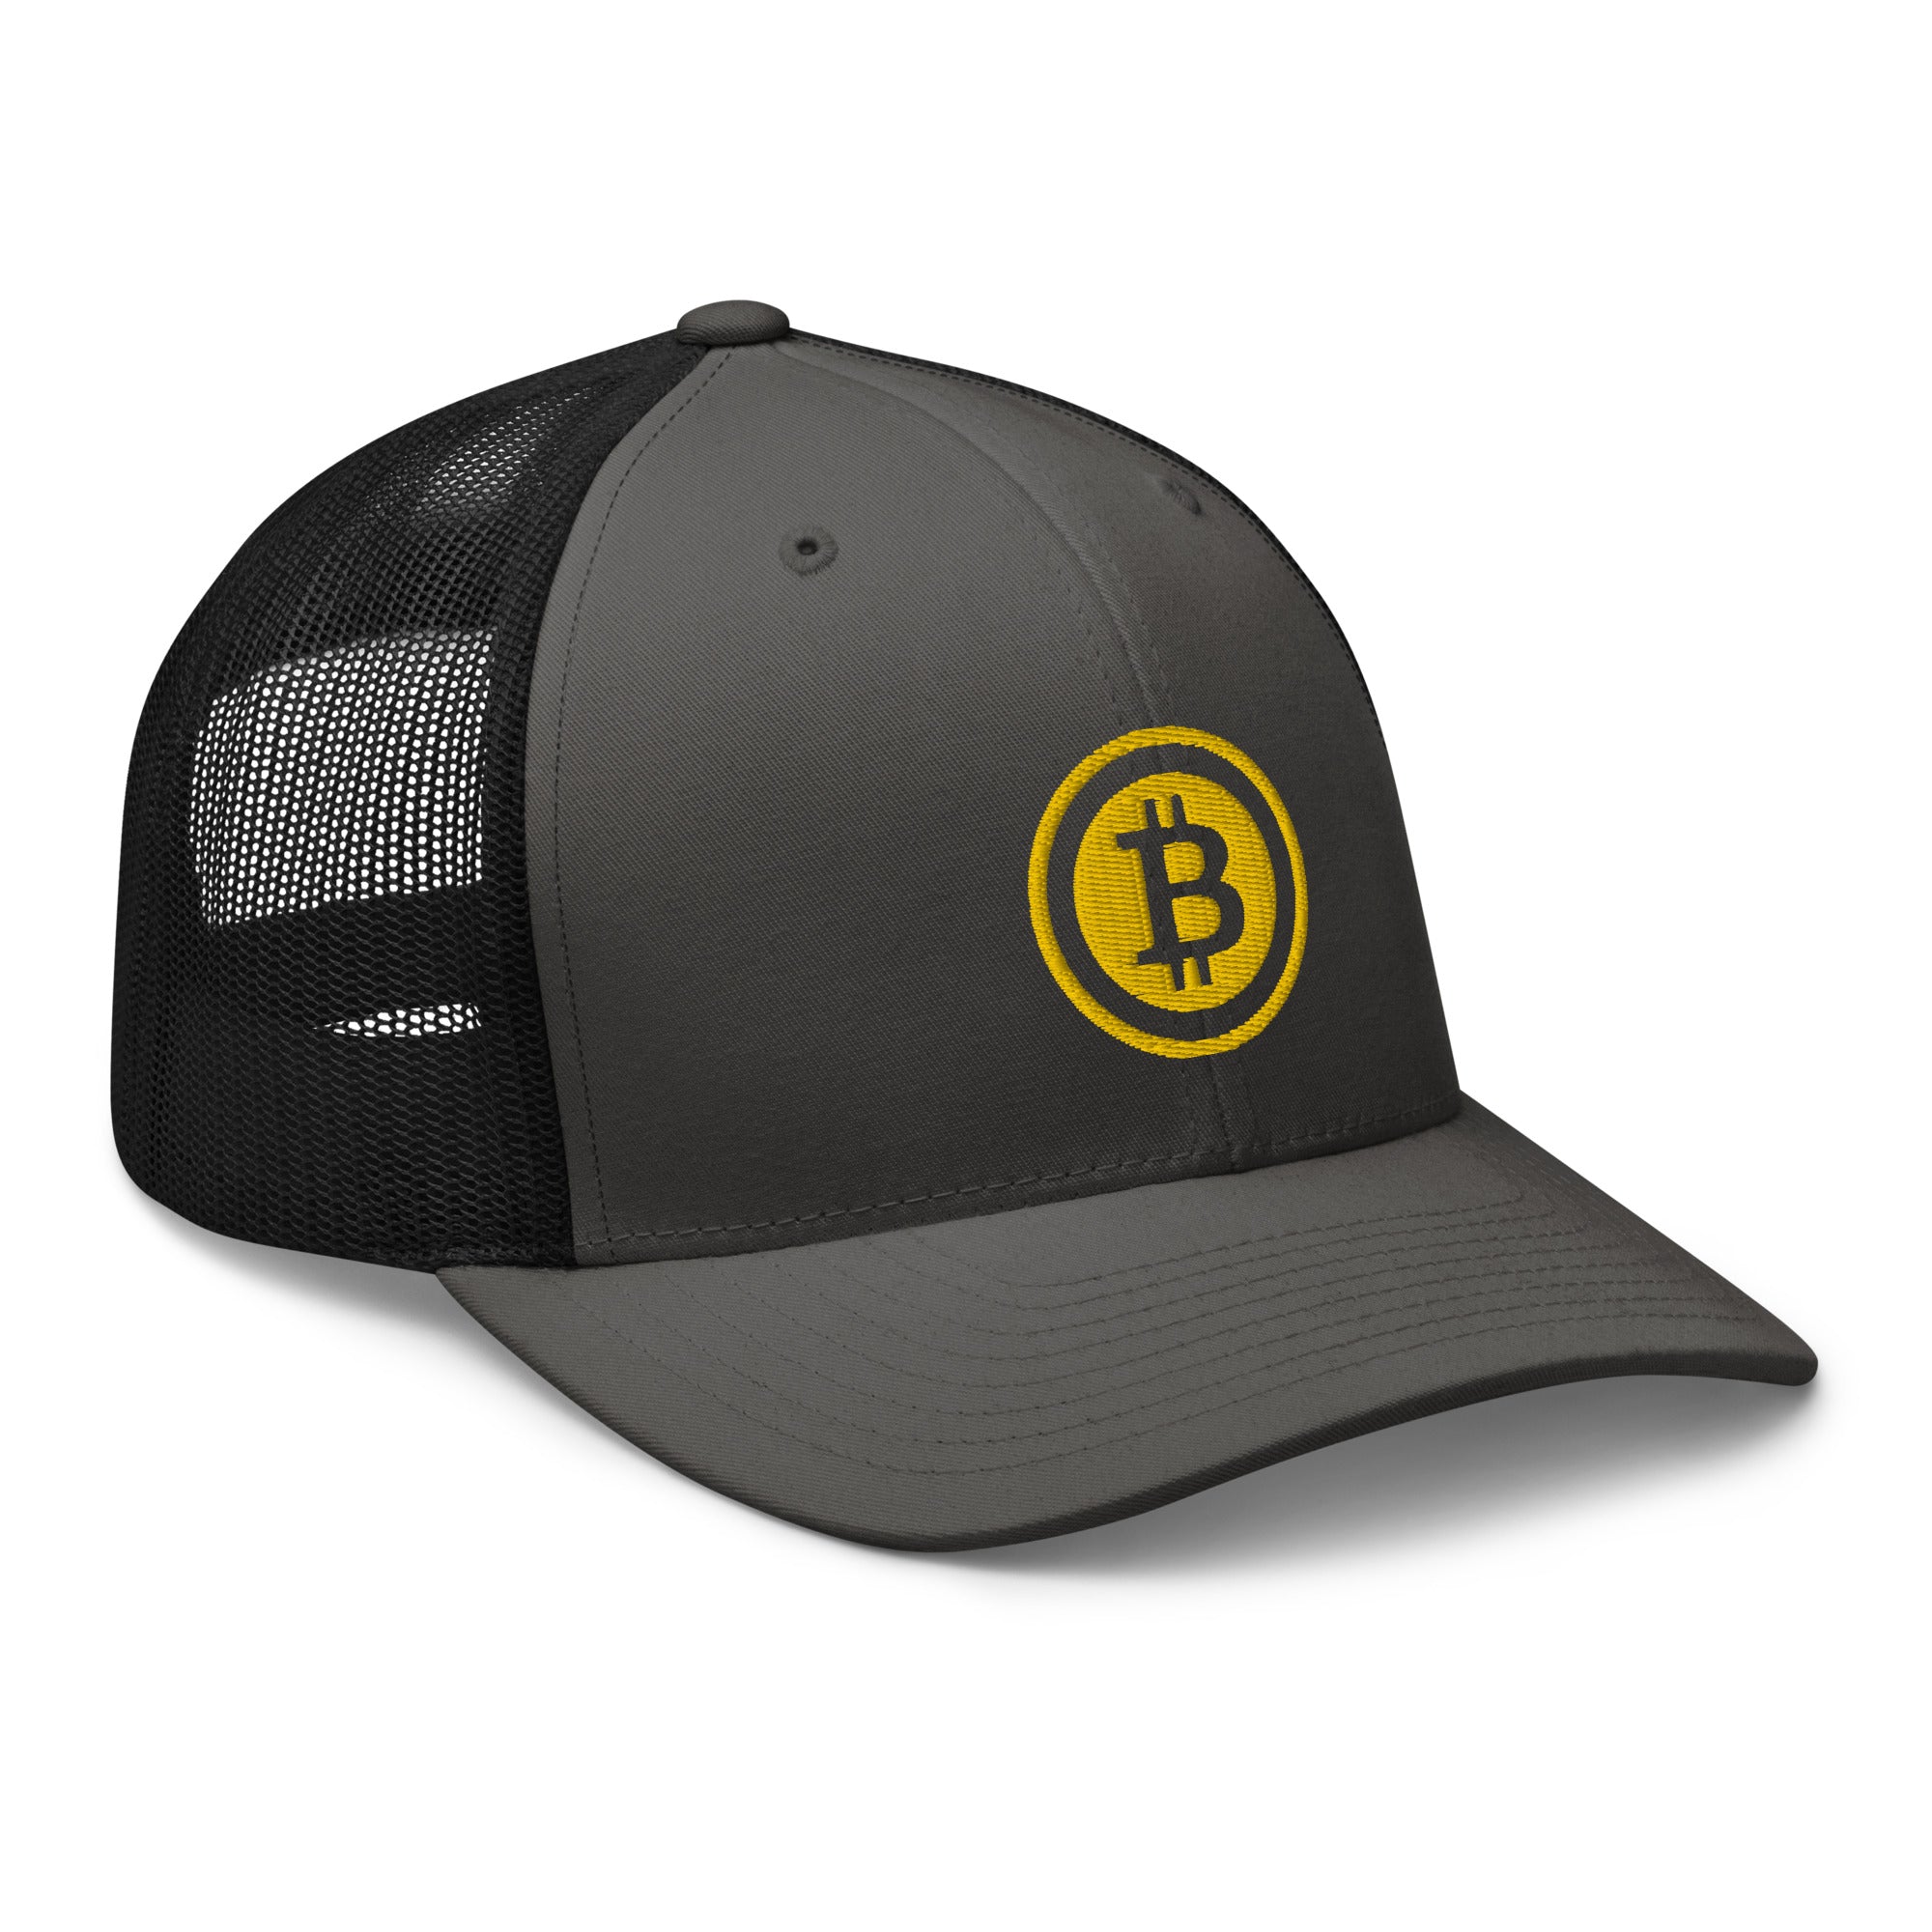 Yellow Bitcoin Crypto Currency Symbol Ticker Embroidered Trucker Cap Snapback Hat